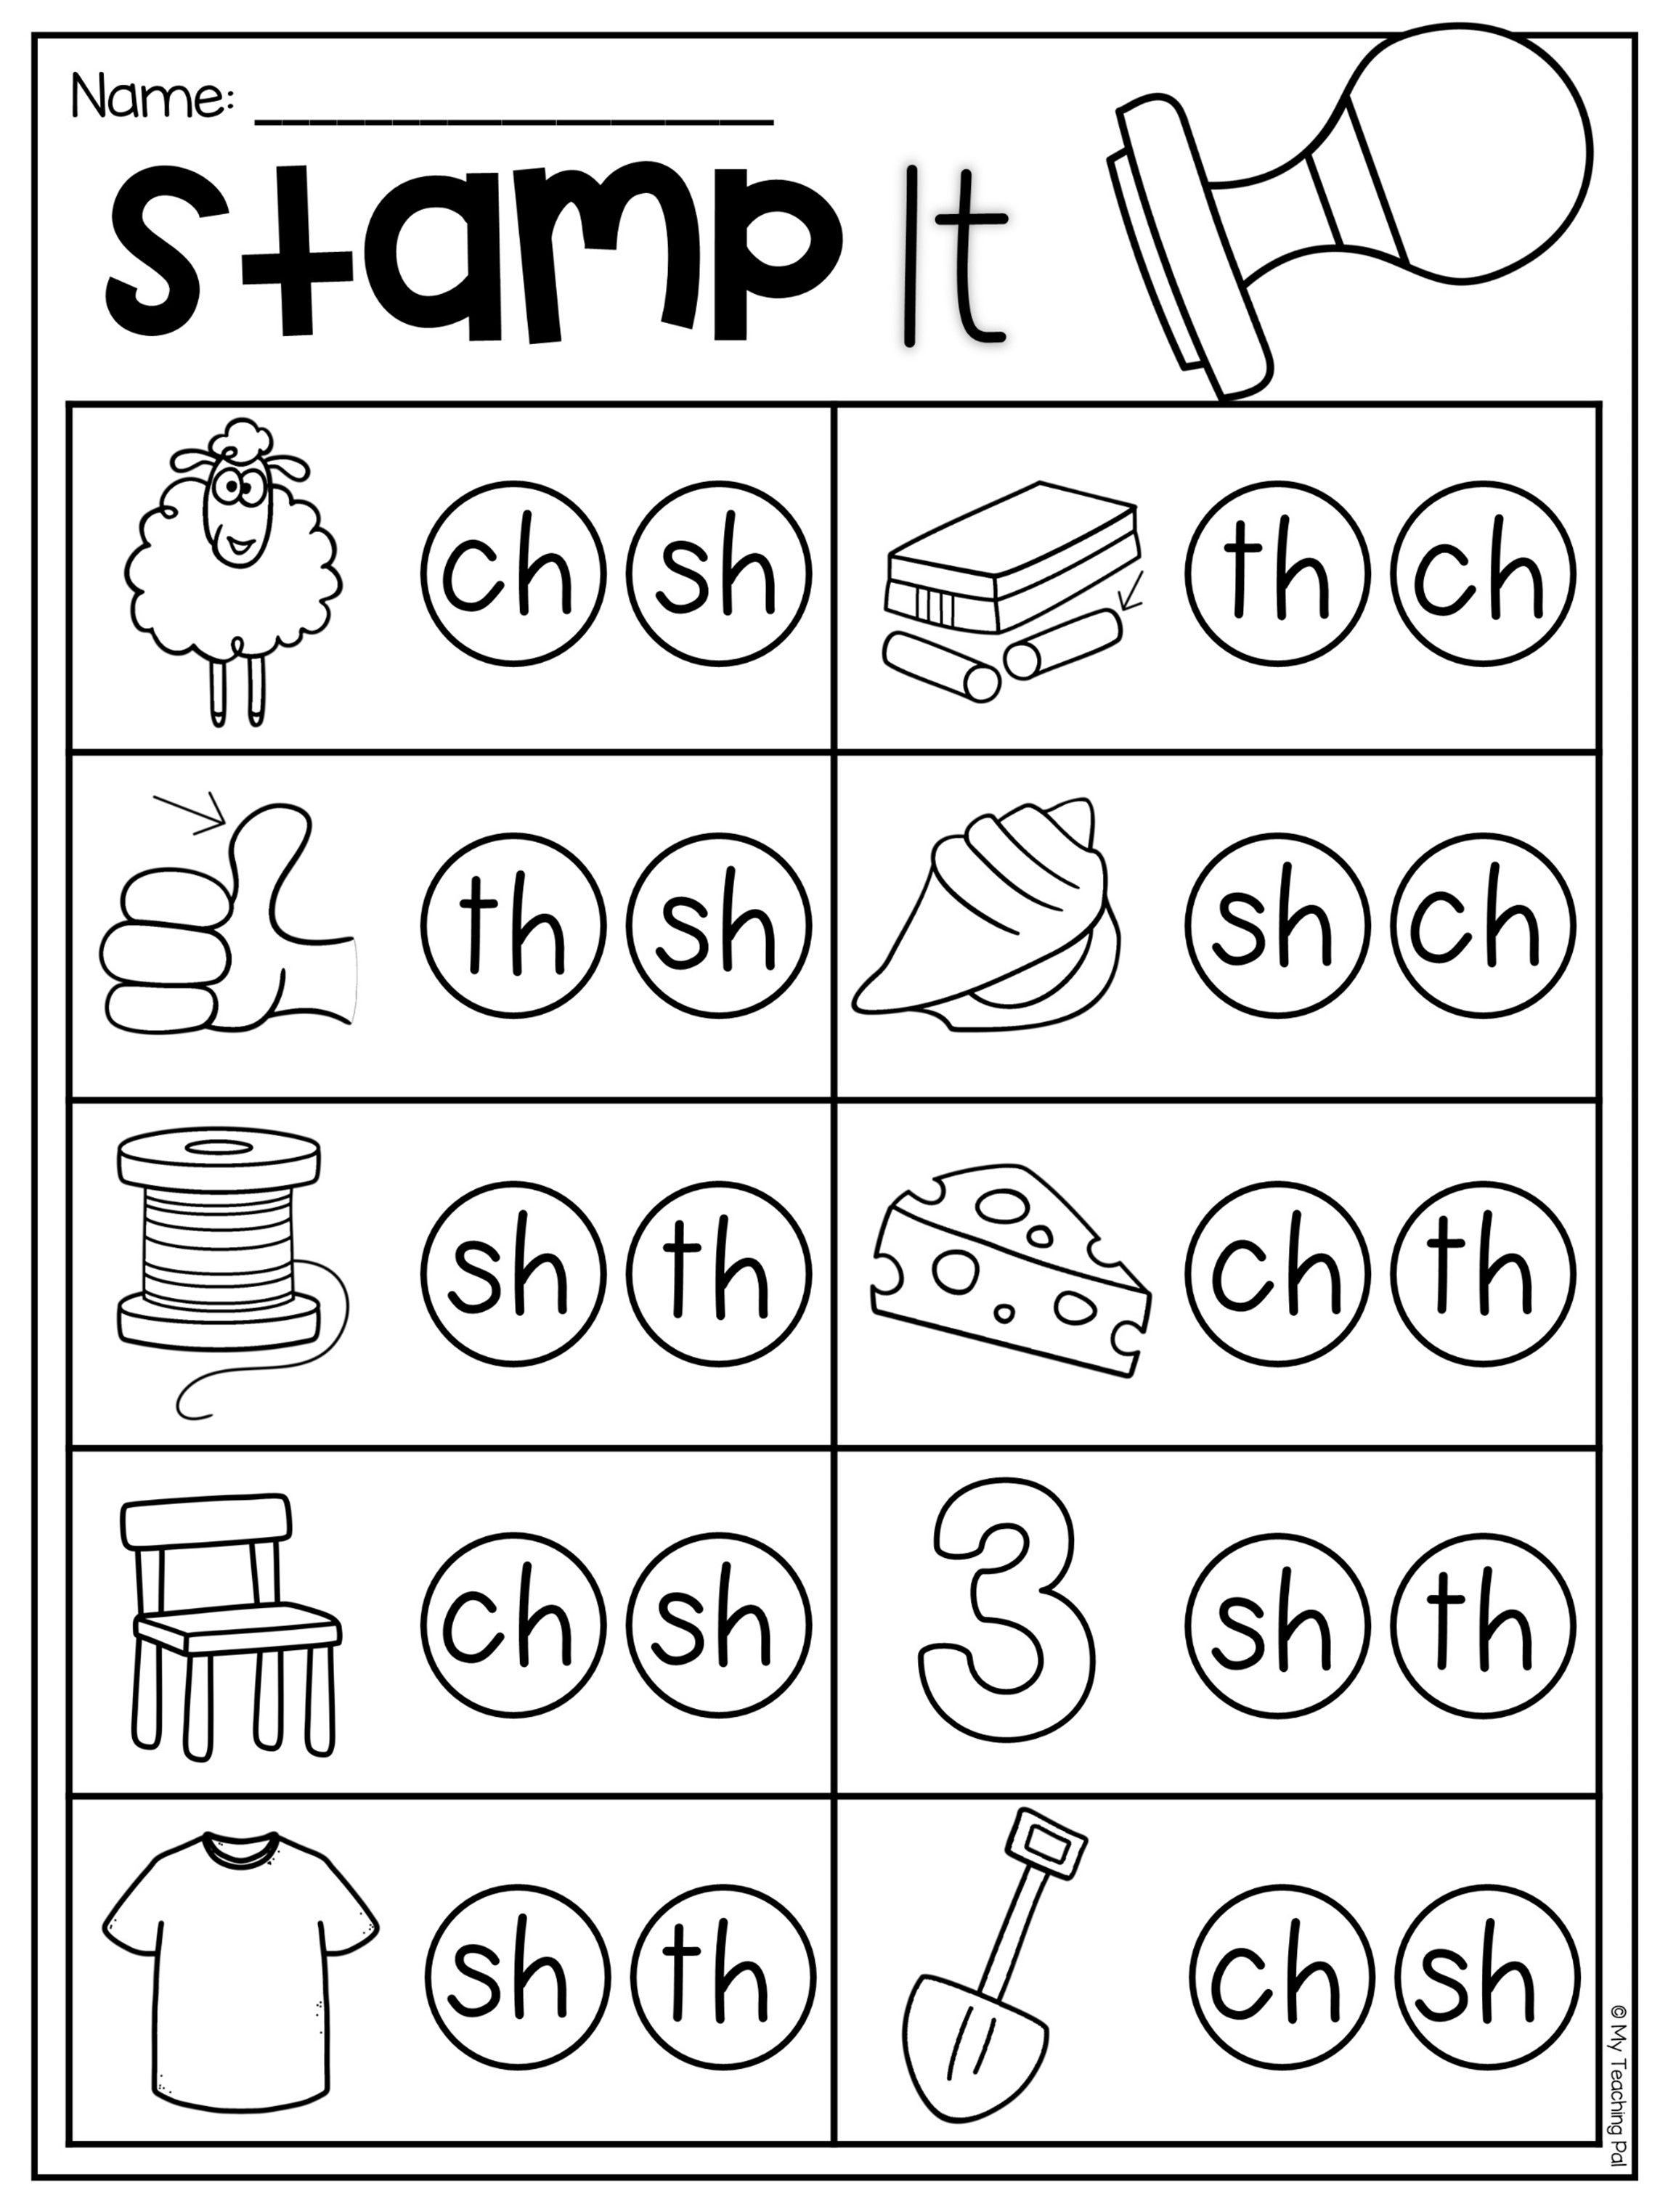 Matching Digraphs Worksheet For Sh Ch Th This Packet Is Jammed Full Sh Worksheets Free 